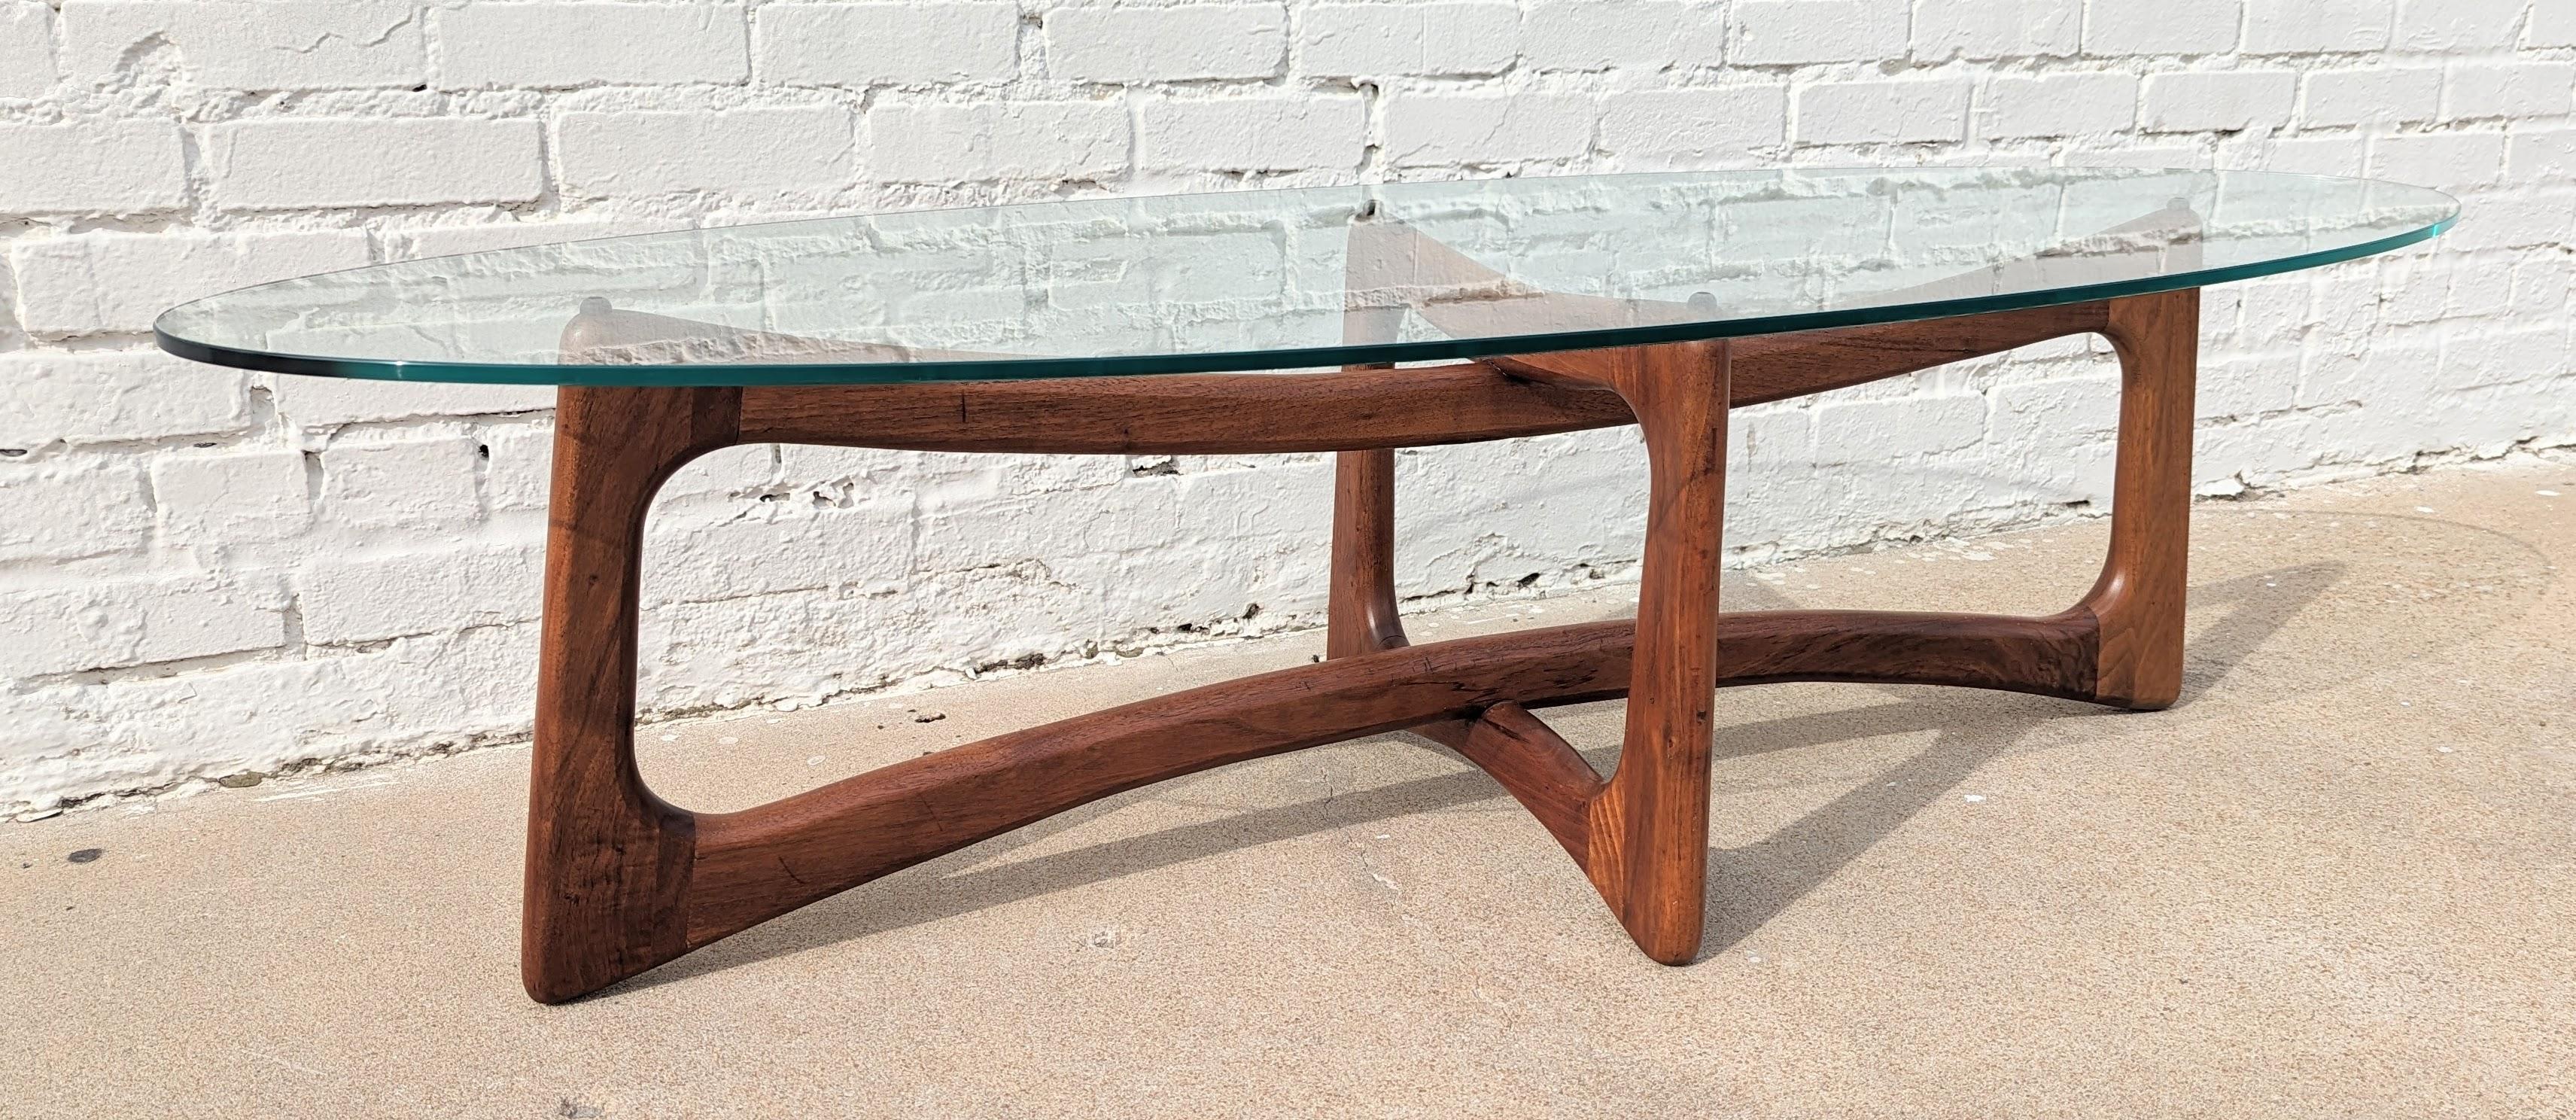 Adrian Pearsall Stingray Coffee Table.  Beautiful and well constructed. Solid Walnut frame and thick 3/8-in glass top. Above average condition and structurally sound. Iconic modern design.  Please ask any additional questions through message.
Scott